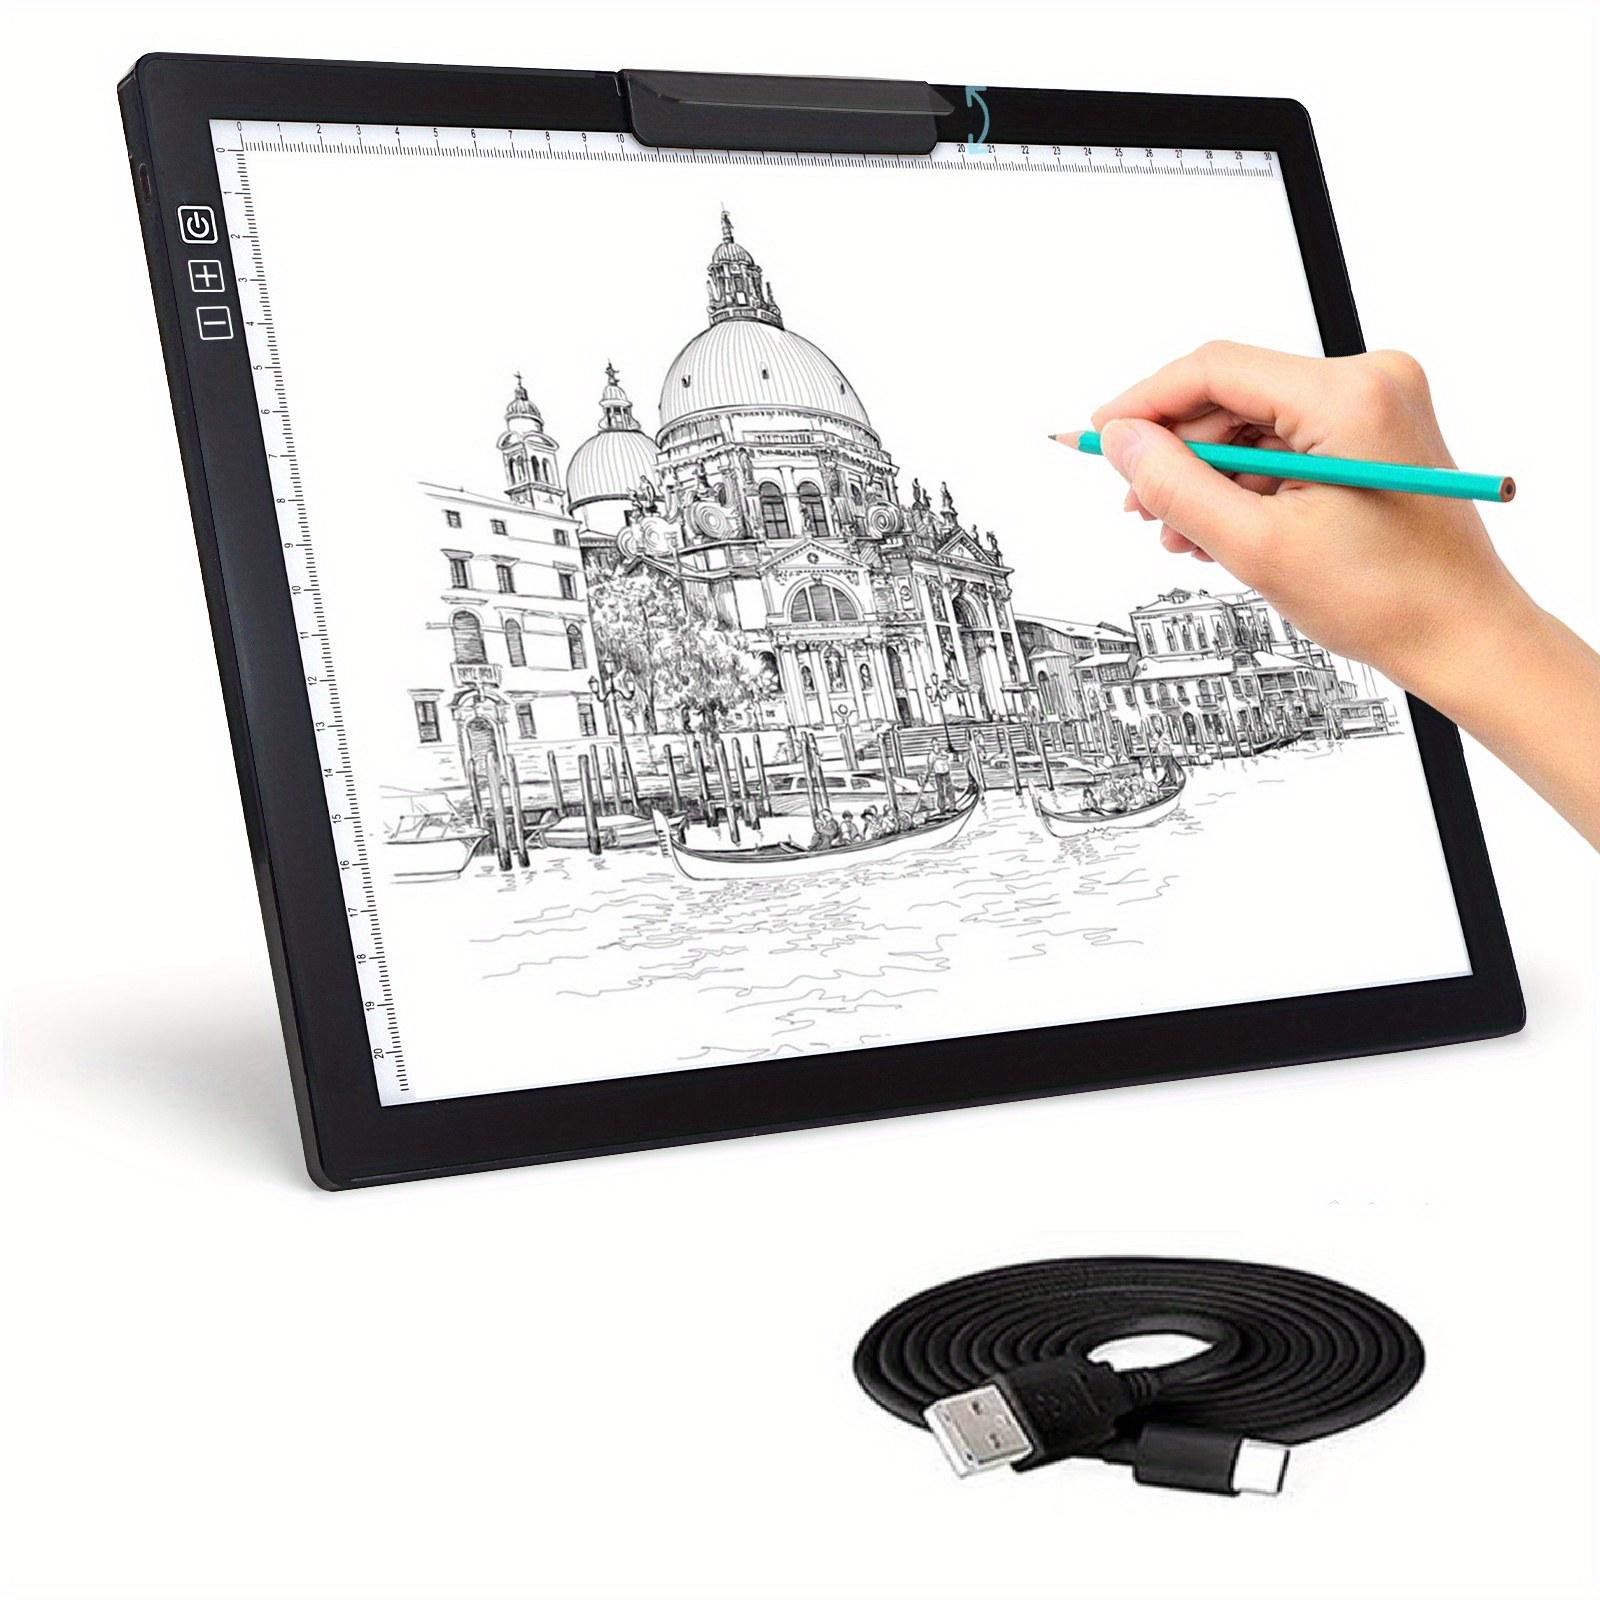  A4 Wireless Battery Powered Light Pad, Tracing Light Box  Dimmable Brightness Rechargeable LED Light Board Portable Cordless Copy  Board For Artist Drawing Sketching X-ray Viewing